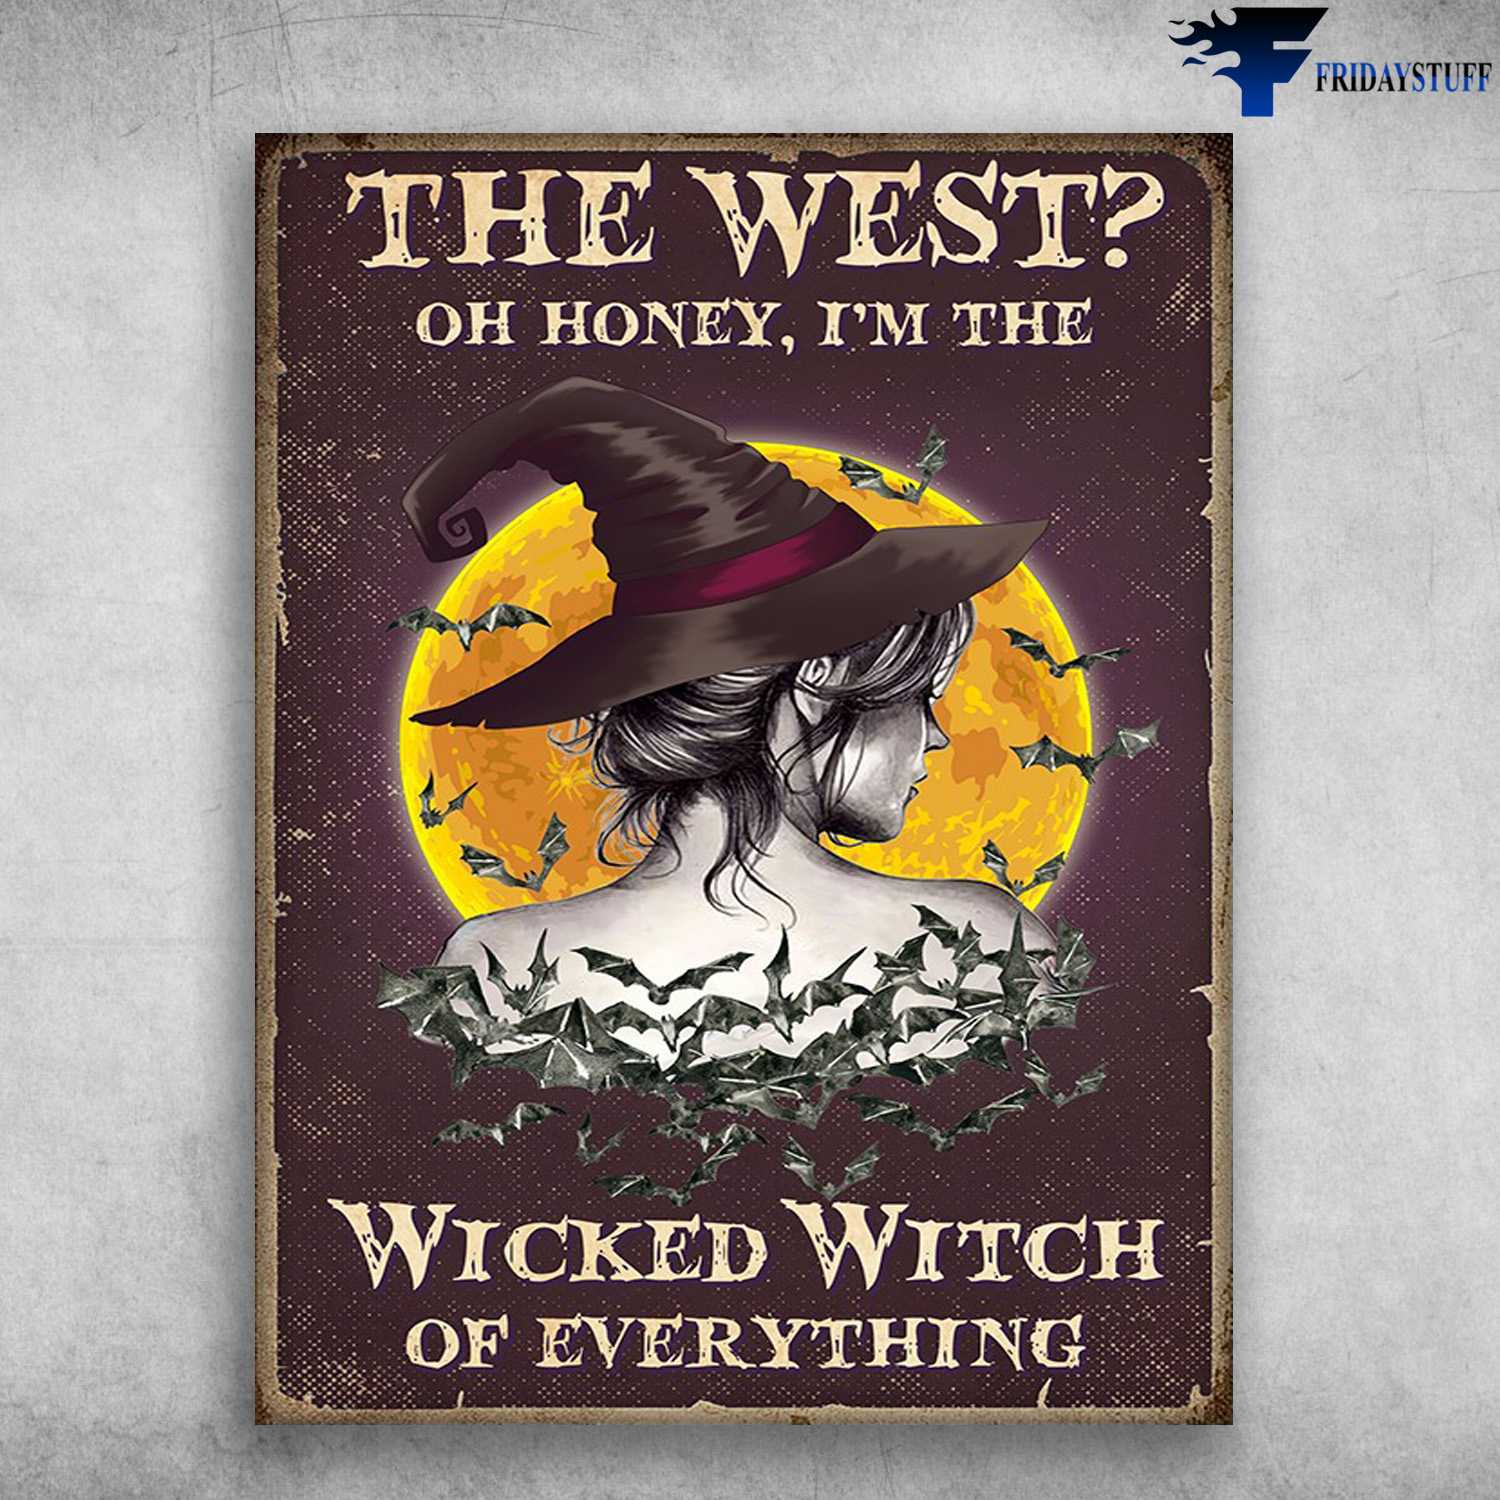 Witch Poster, Halloween Day - The West, Oh Honey, I'm The Wicked Witch, Of Everything